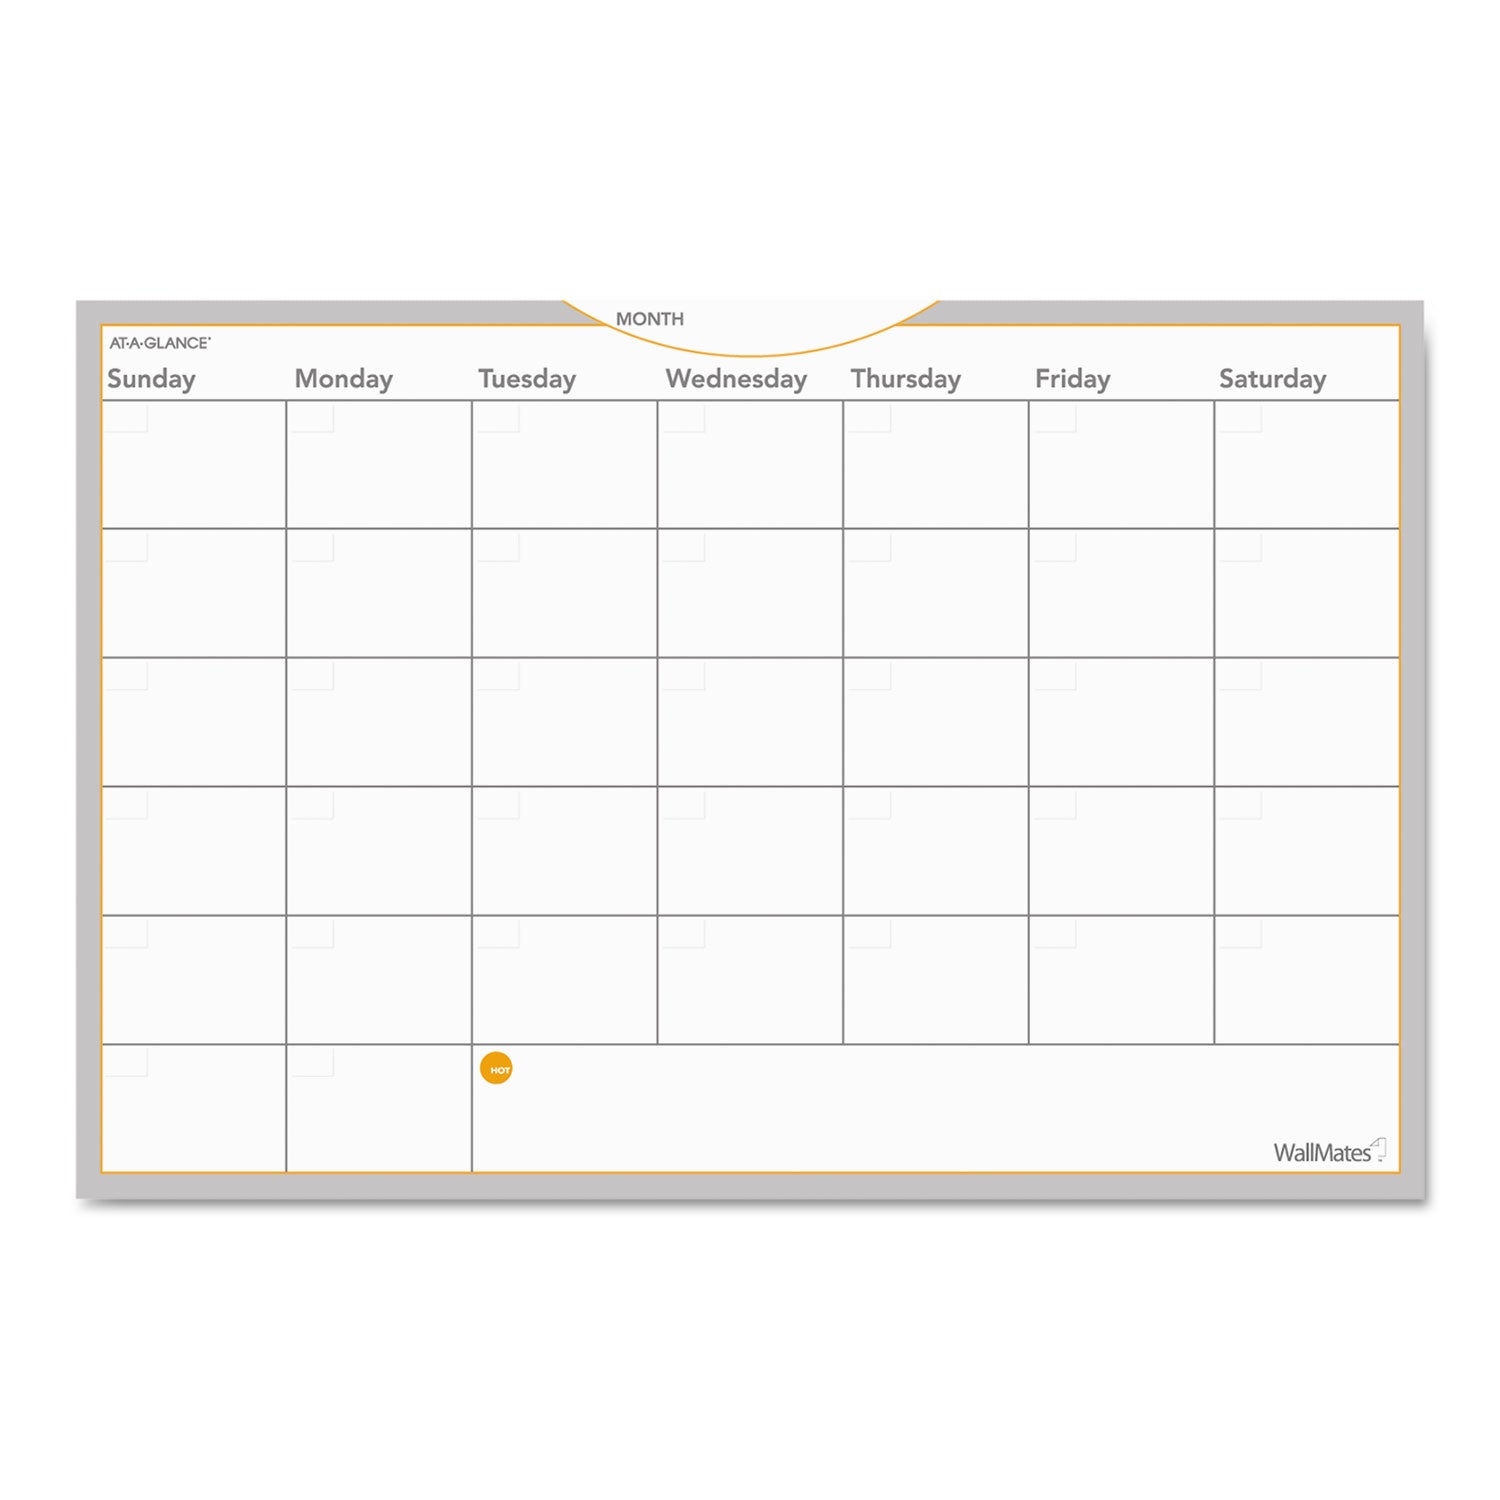 WallMates Self-Adhesive Dry Erase Monthly Planning Surfaces, 36 x 24, White/Gray/Orange Sheets, Undated - 